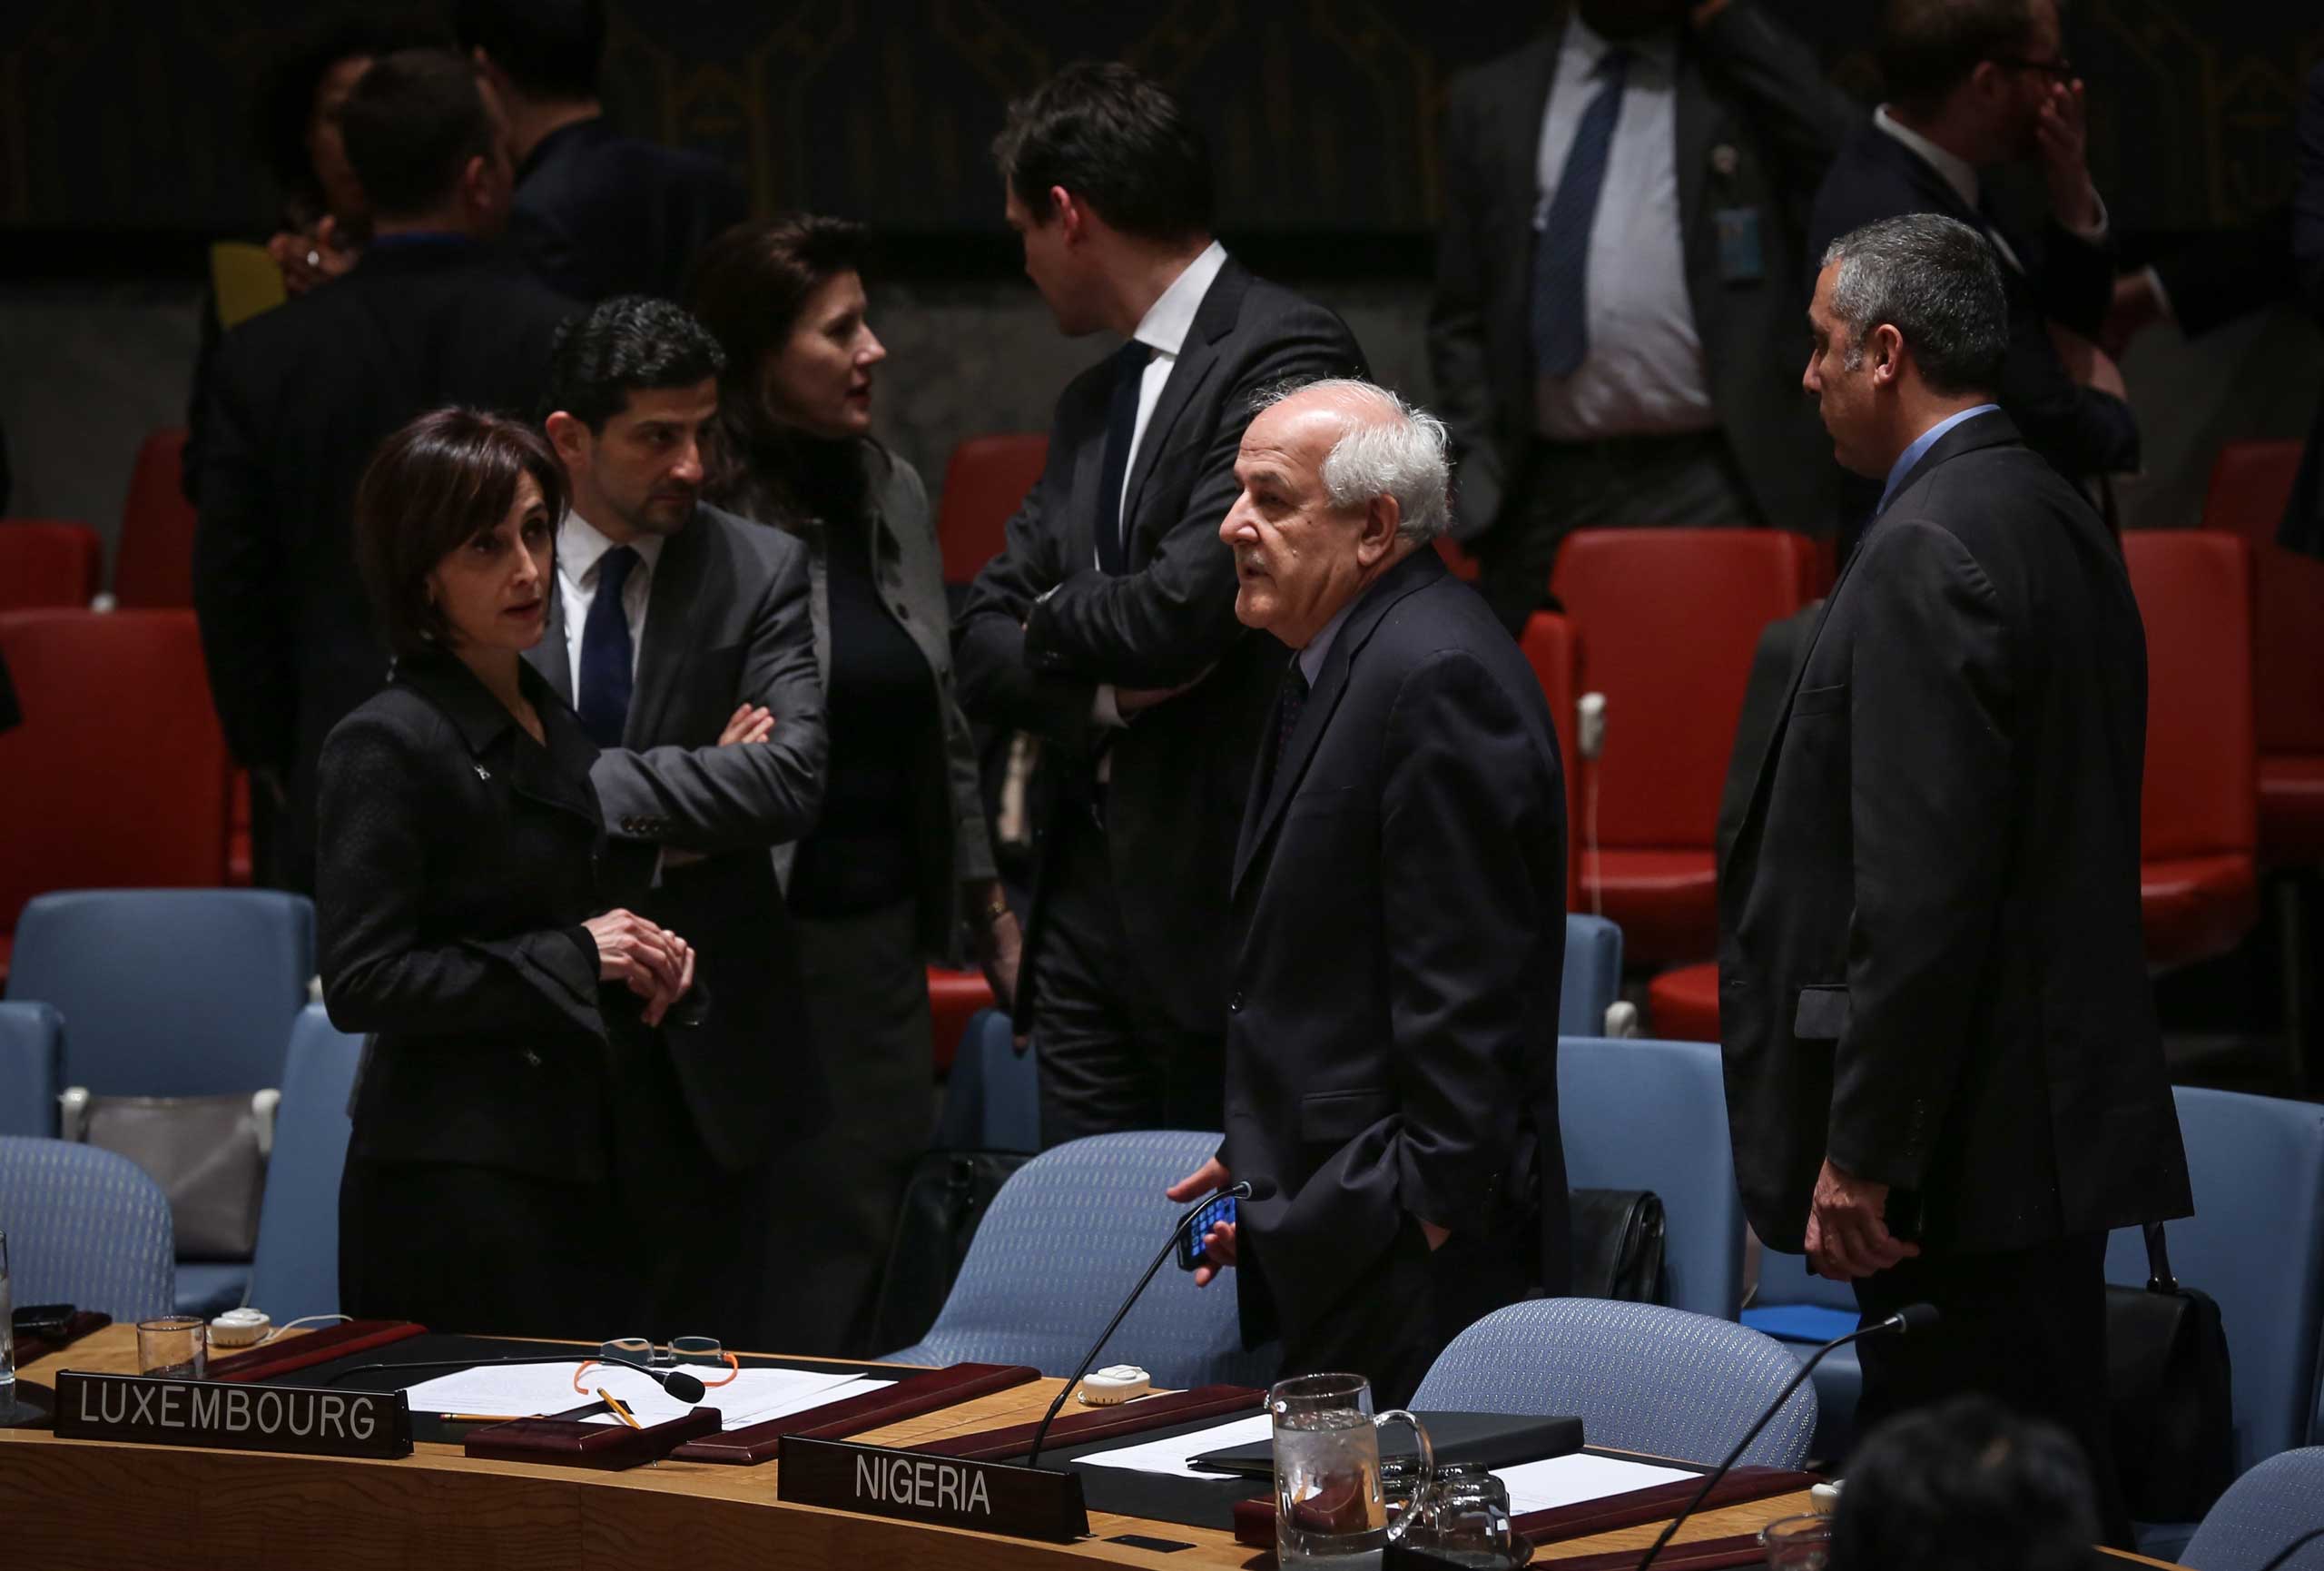 Riyad Mansour, second right, Permanent Observer of Palestine to the United Nations, is seen during the United Nations (UN) Security Council meeting in New York on Dec. 30, 2014. (Cem Ozdel—Anadolu Agency/Getty Images)